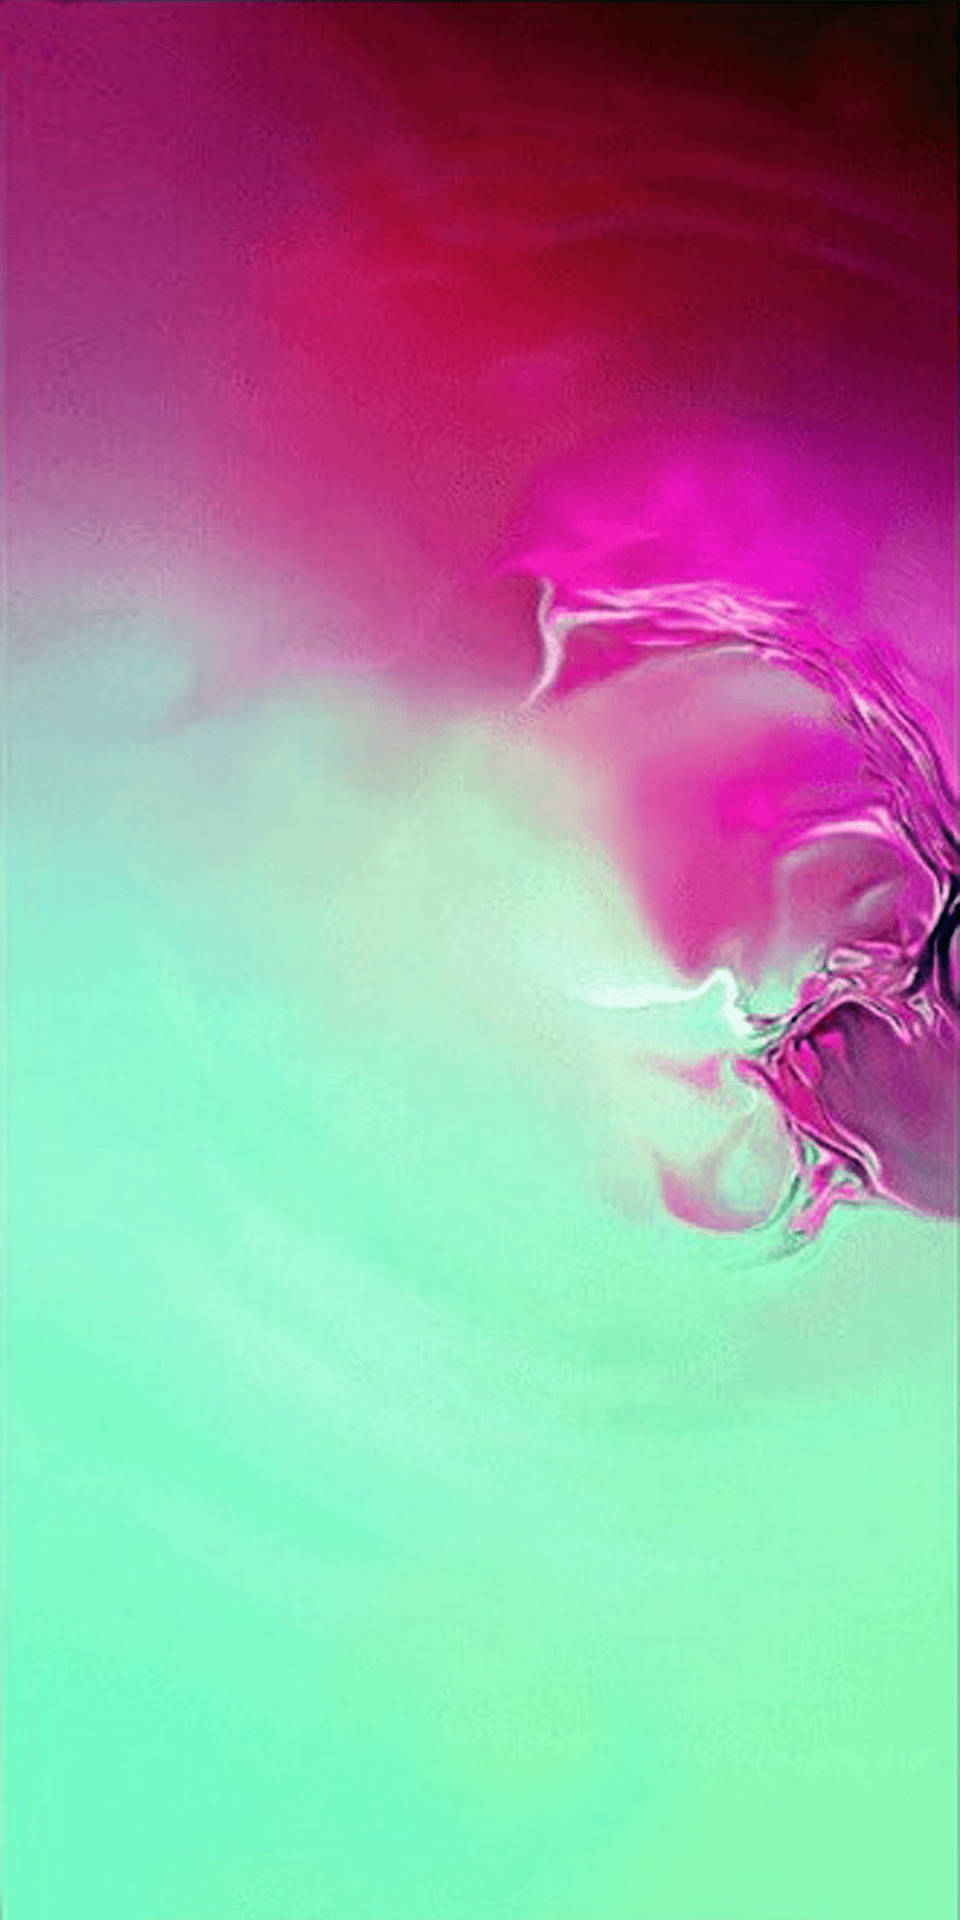 Let the Liquid Art Flow in the Samsung Galaxy S10 Plus Wallpaper